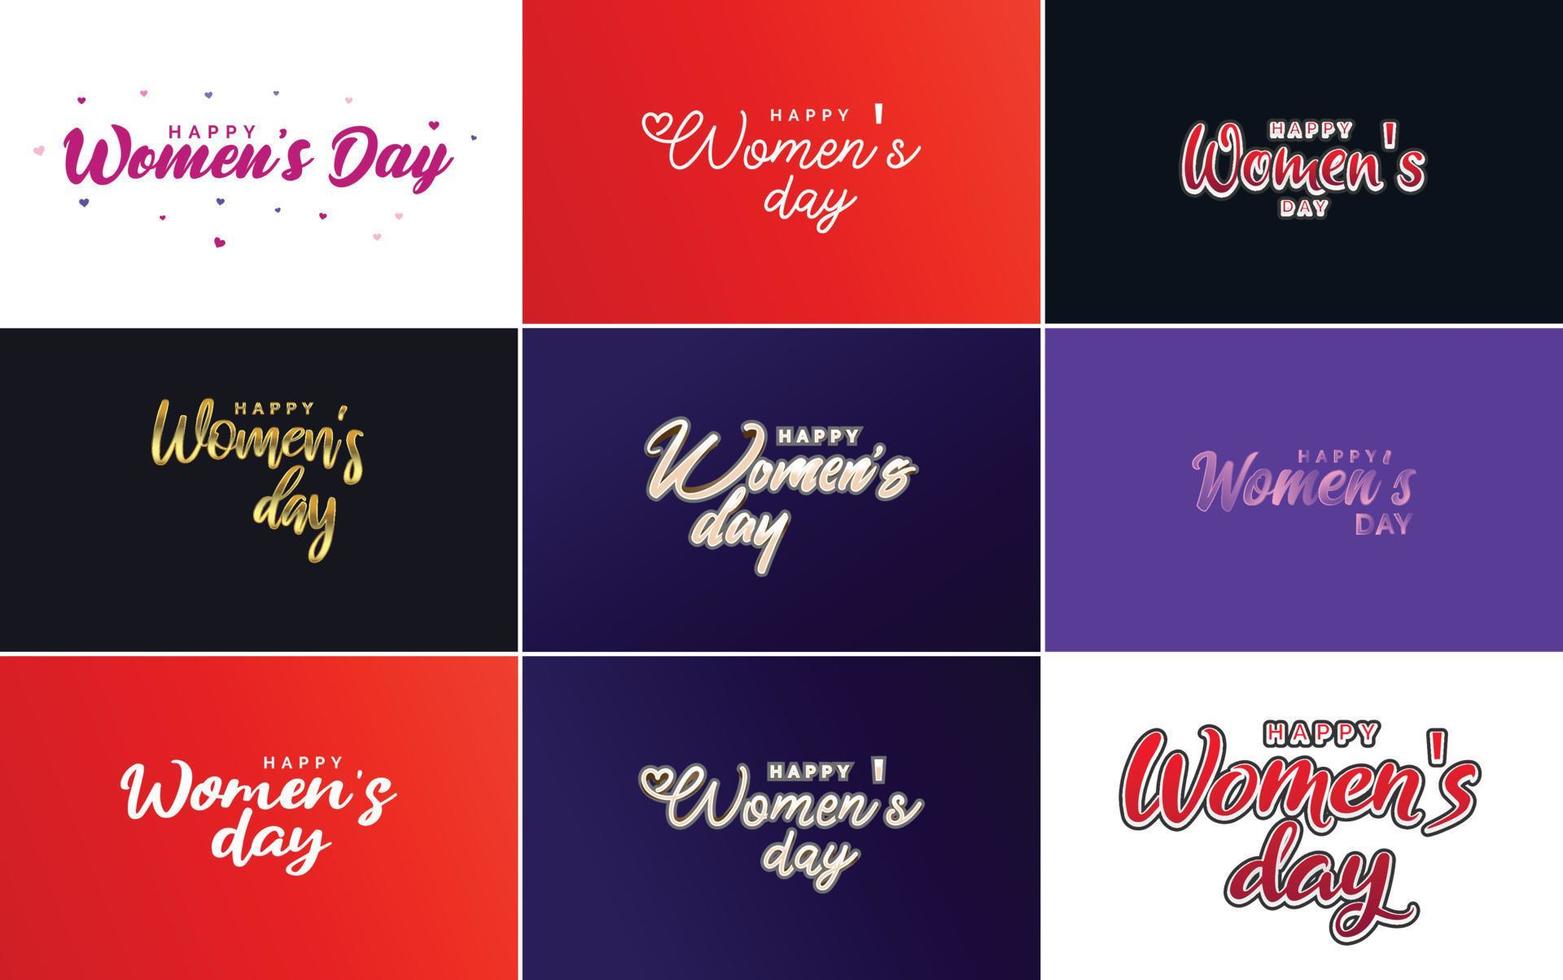 Pink Happy Women's Day typographical design elements set for greeting cards vector